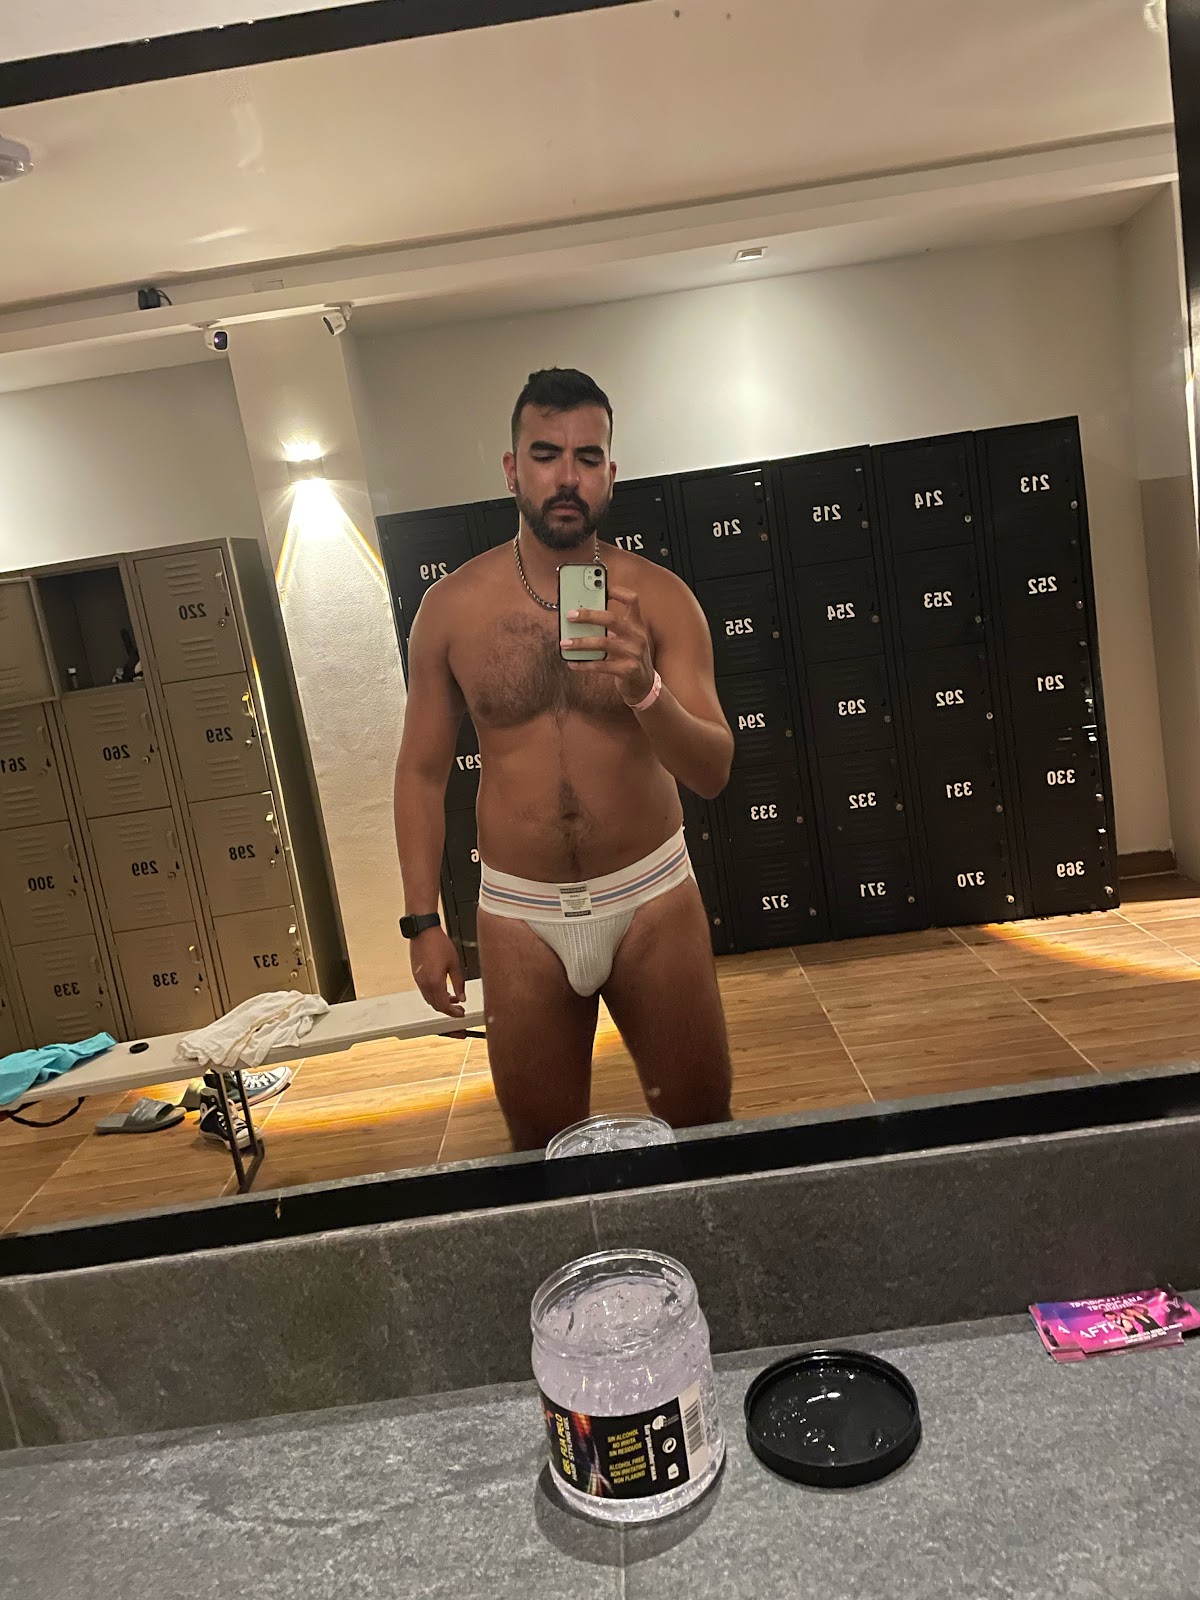 gay male undressing at the bathhouse wearing white jock strap and taking an iphone mirror selfie